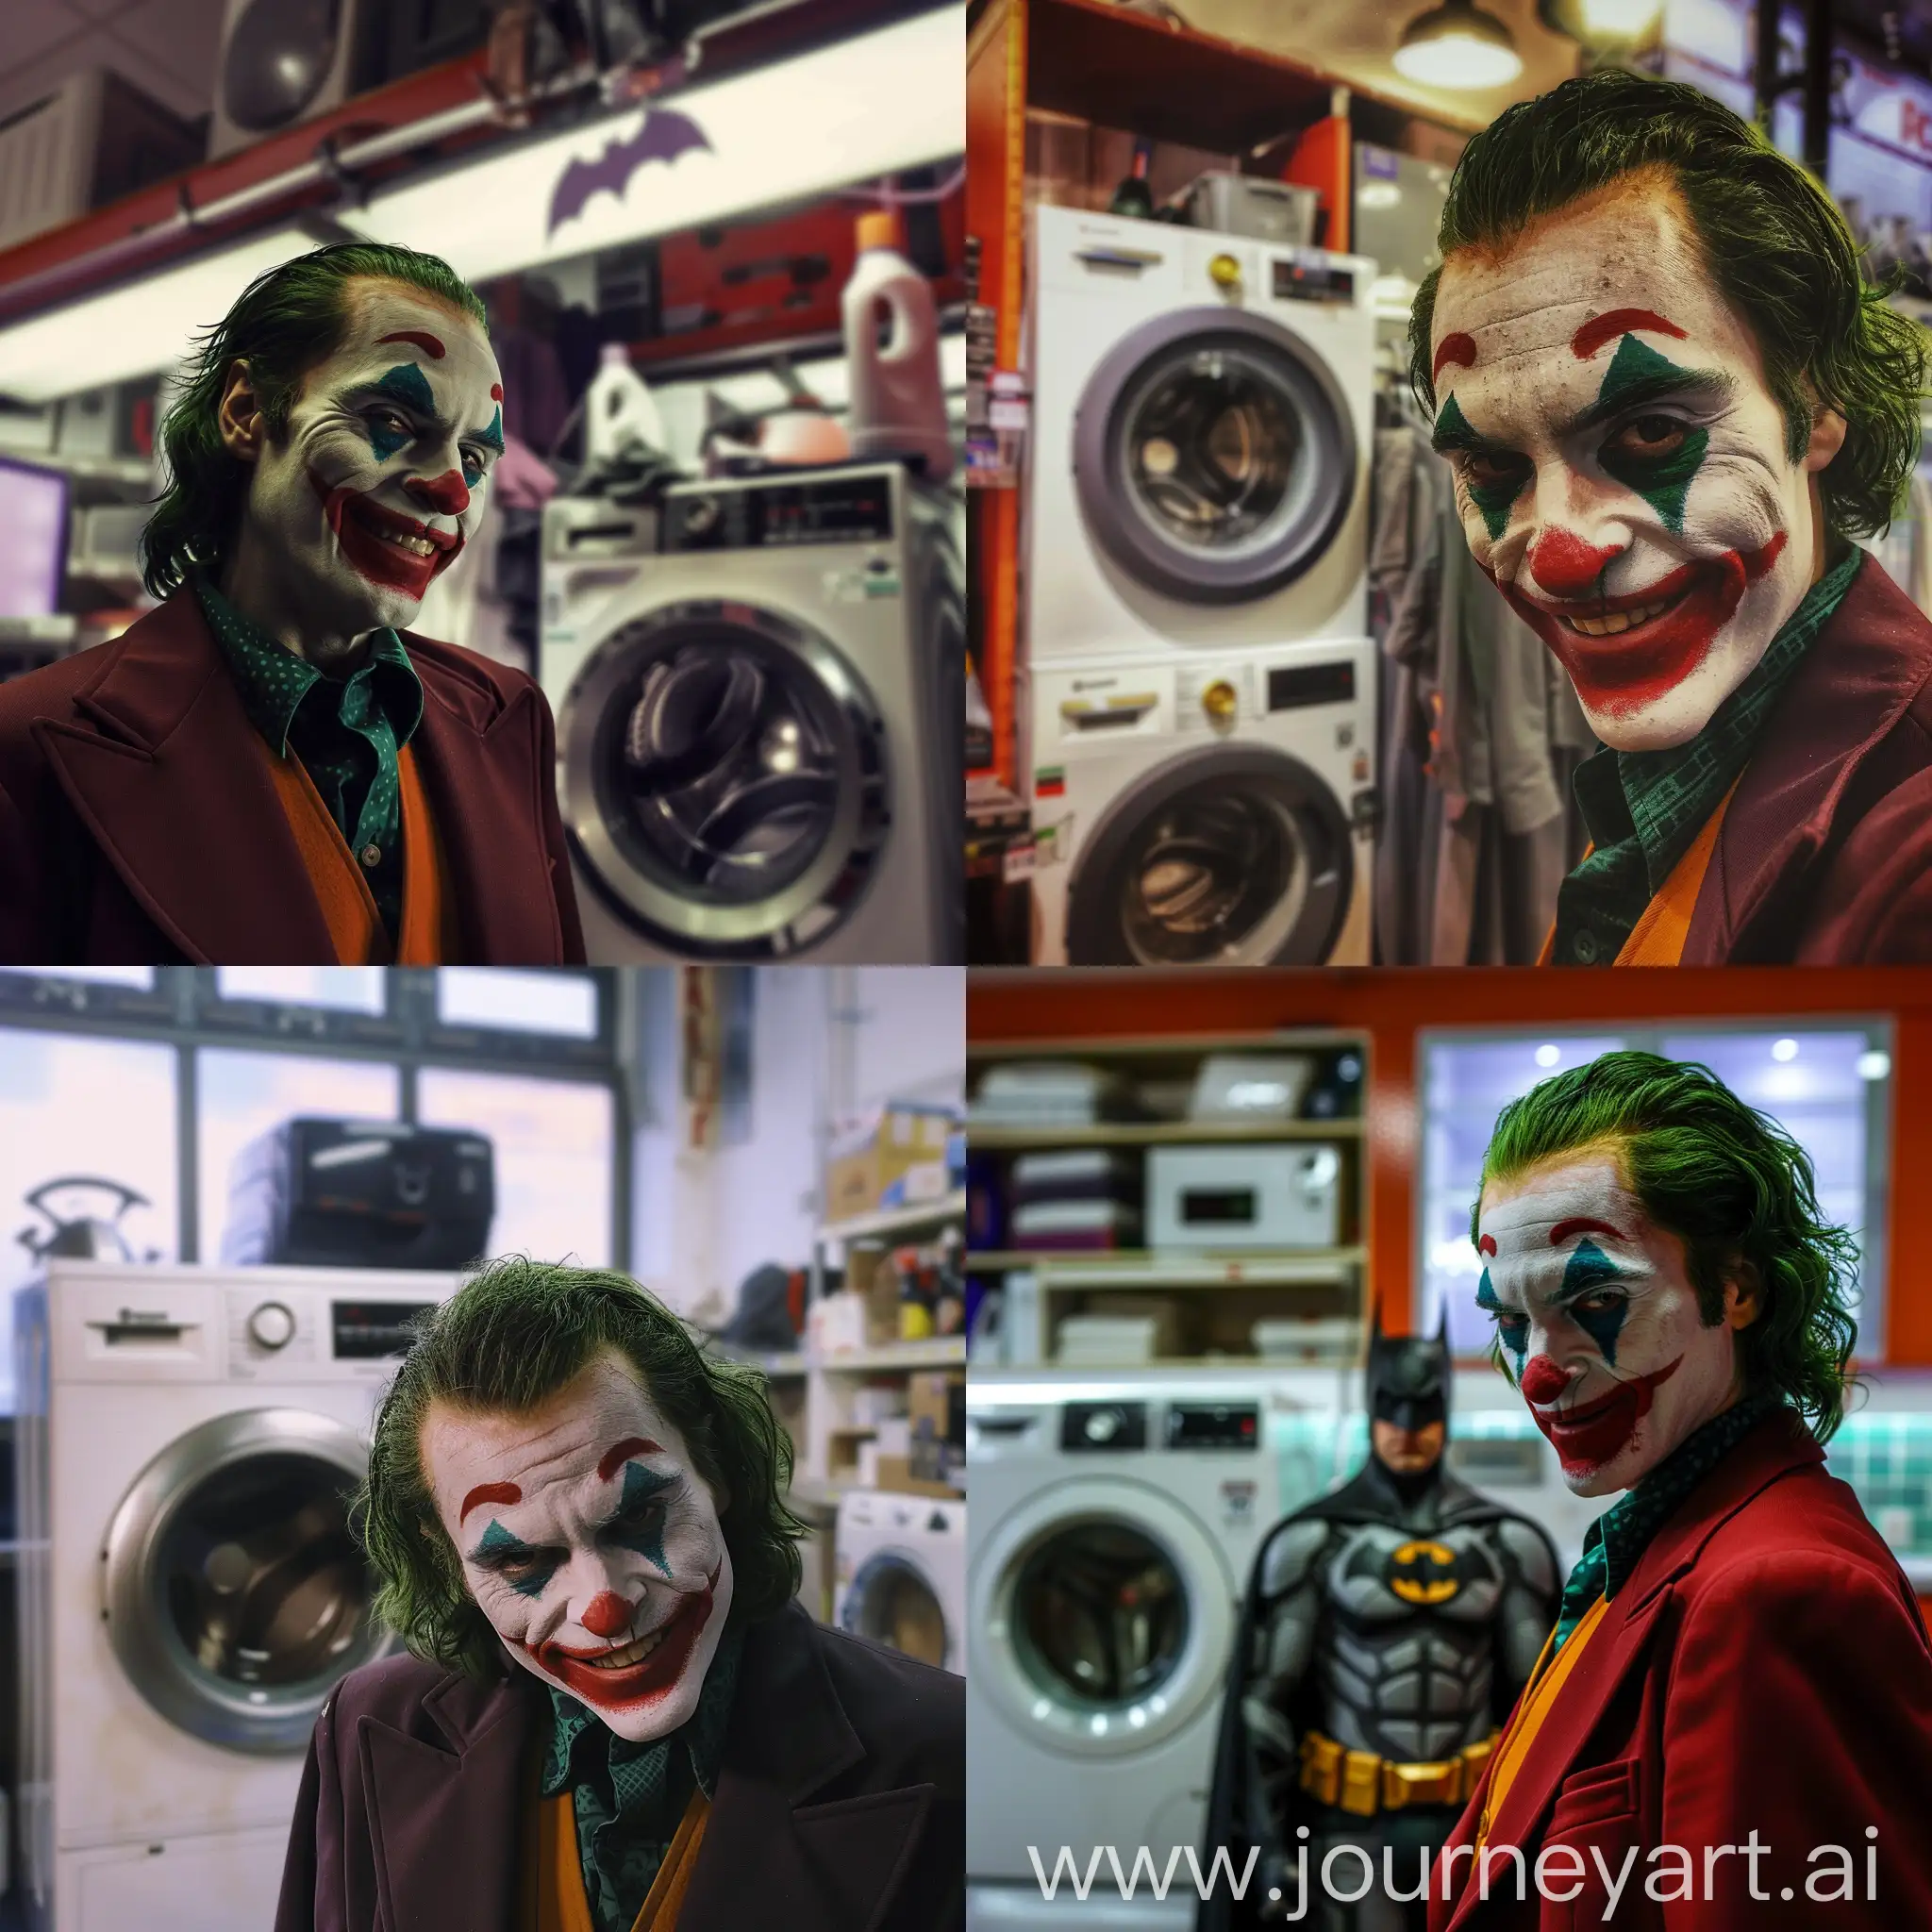 Joker-Smiling-in-Home-Appliance-Store-with-Realistic-Appliances